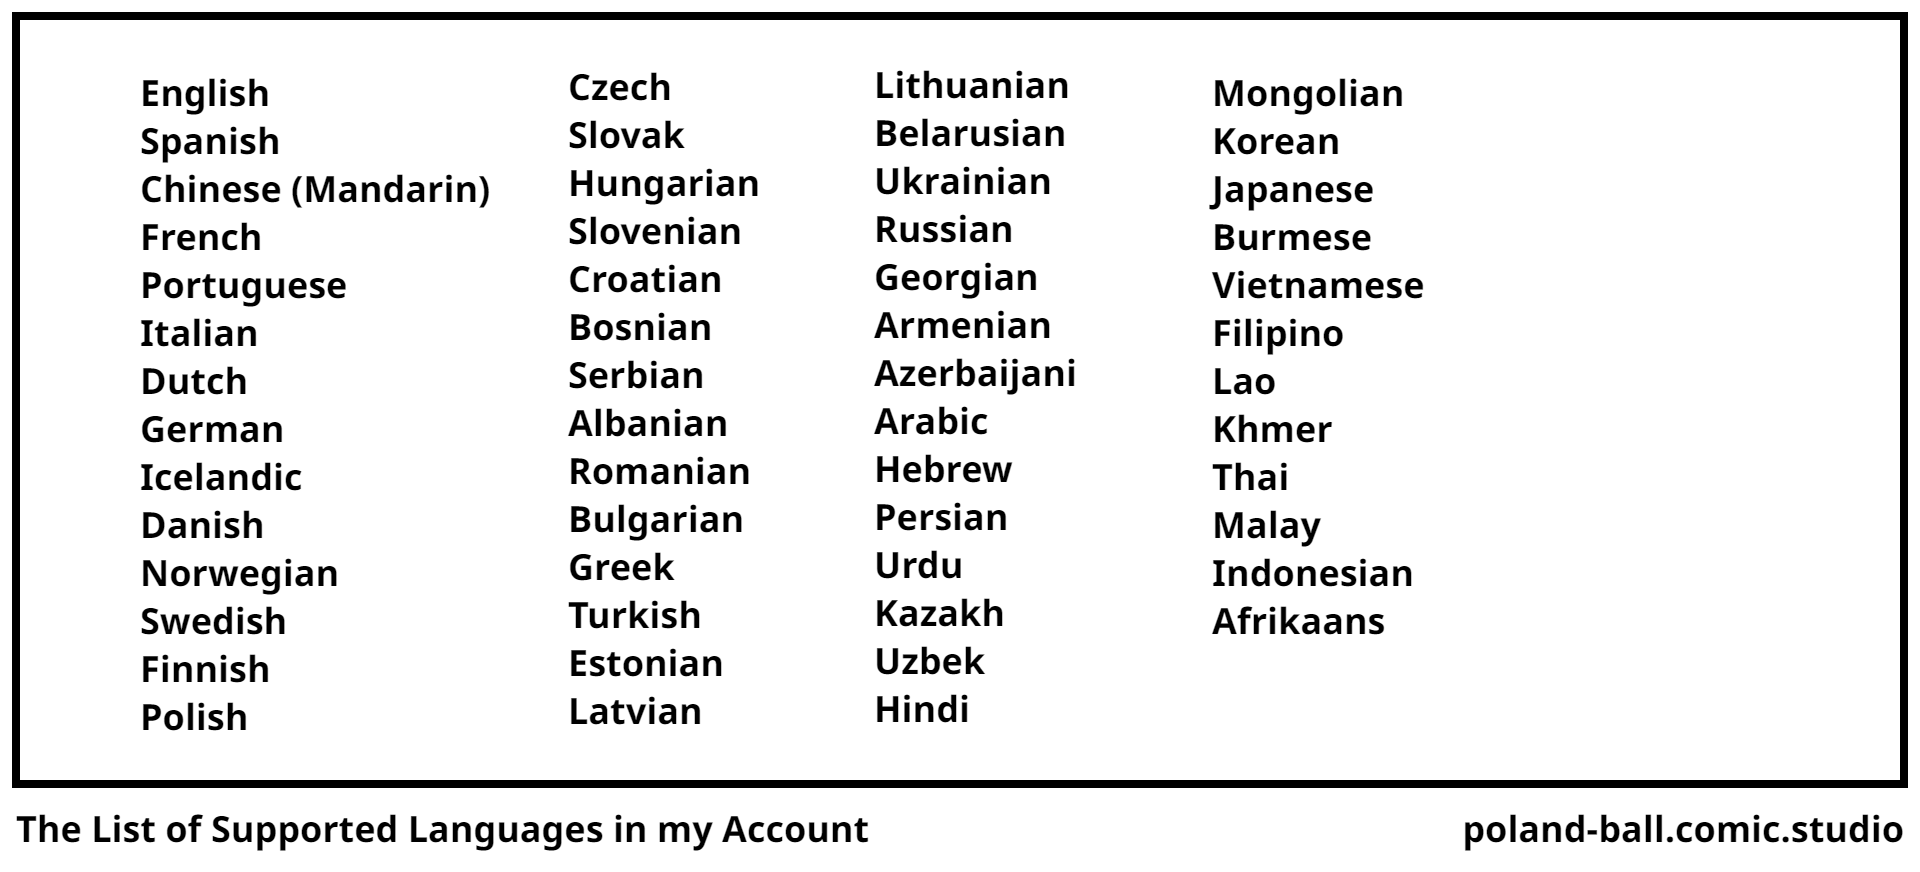 The List of Supported Languages in my Account